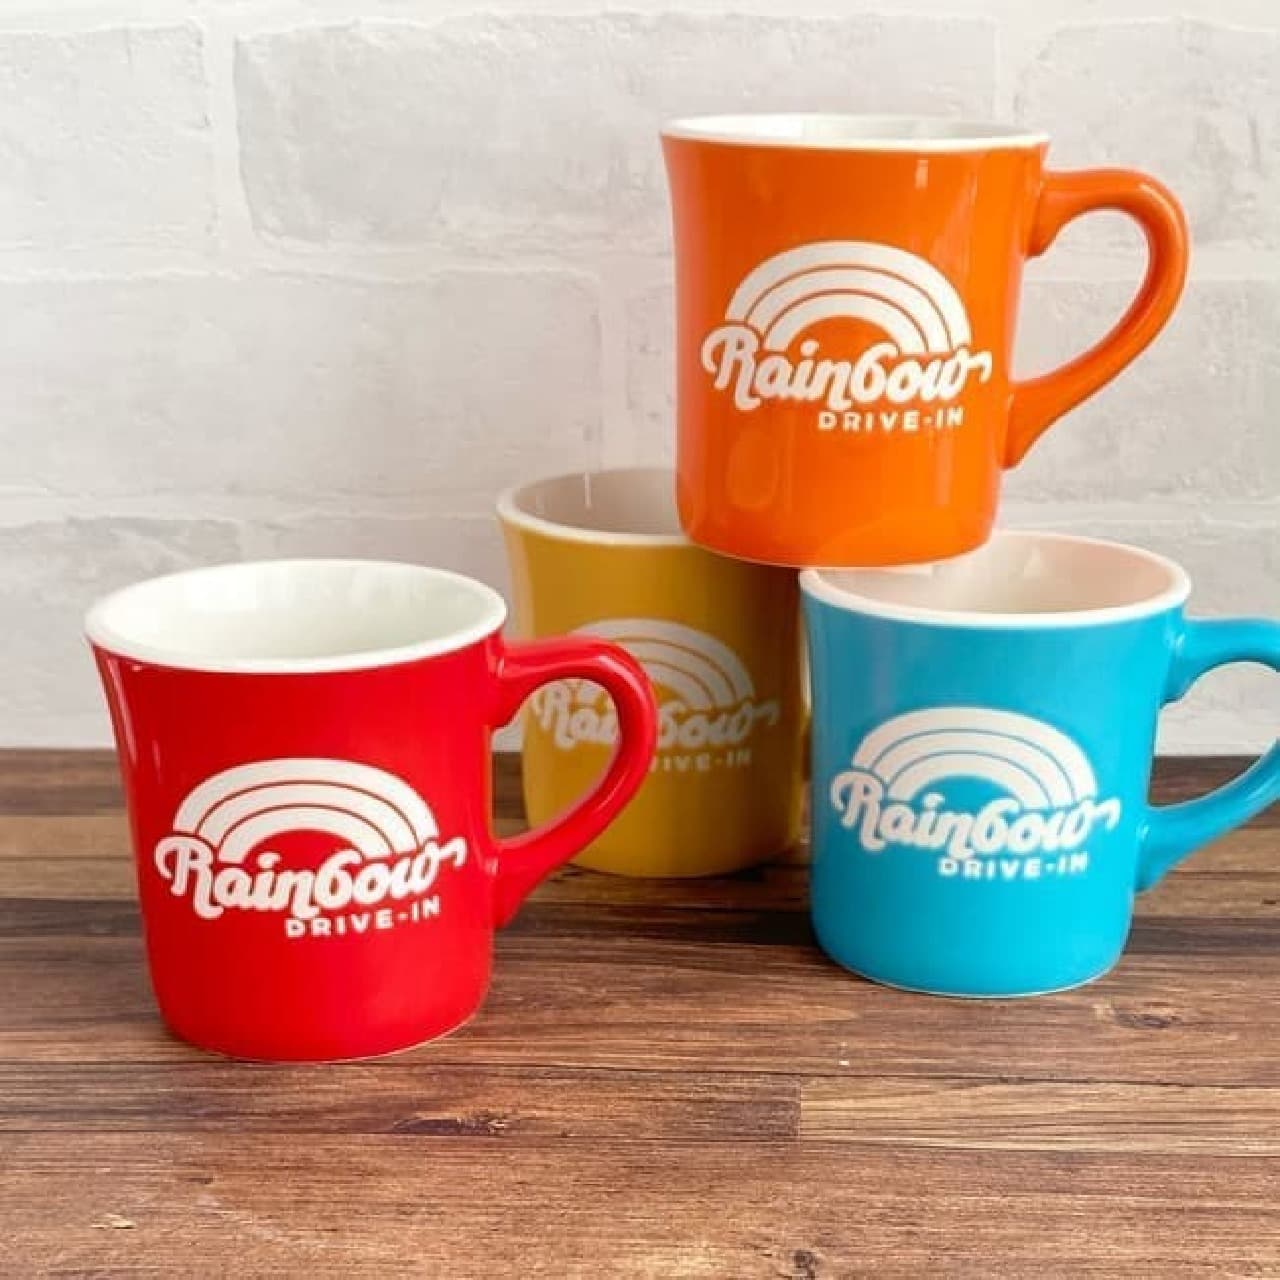 Hawaii's popular store "Rainbow Drive-In" limited items are now in PLAZA --Colorful mugs, tote bags, etc.